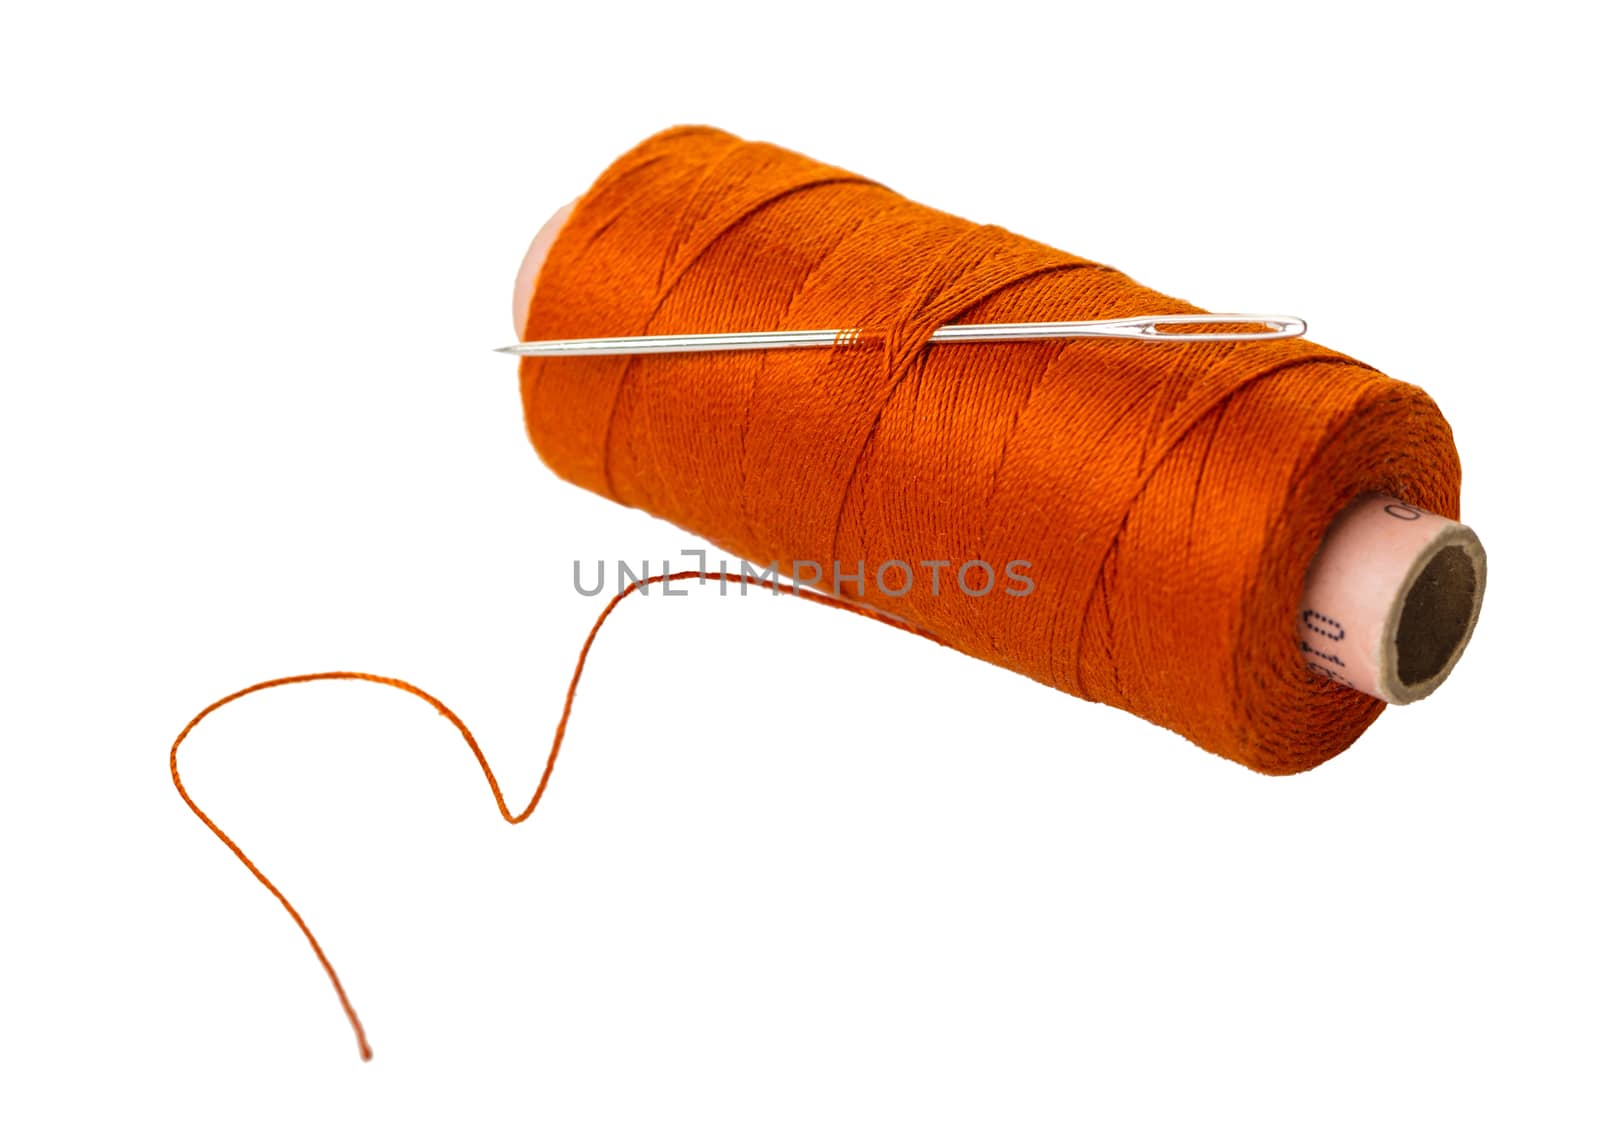 spool of thread with a needle on white isolated background